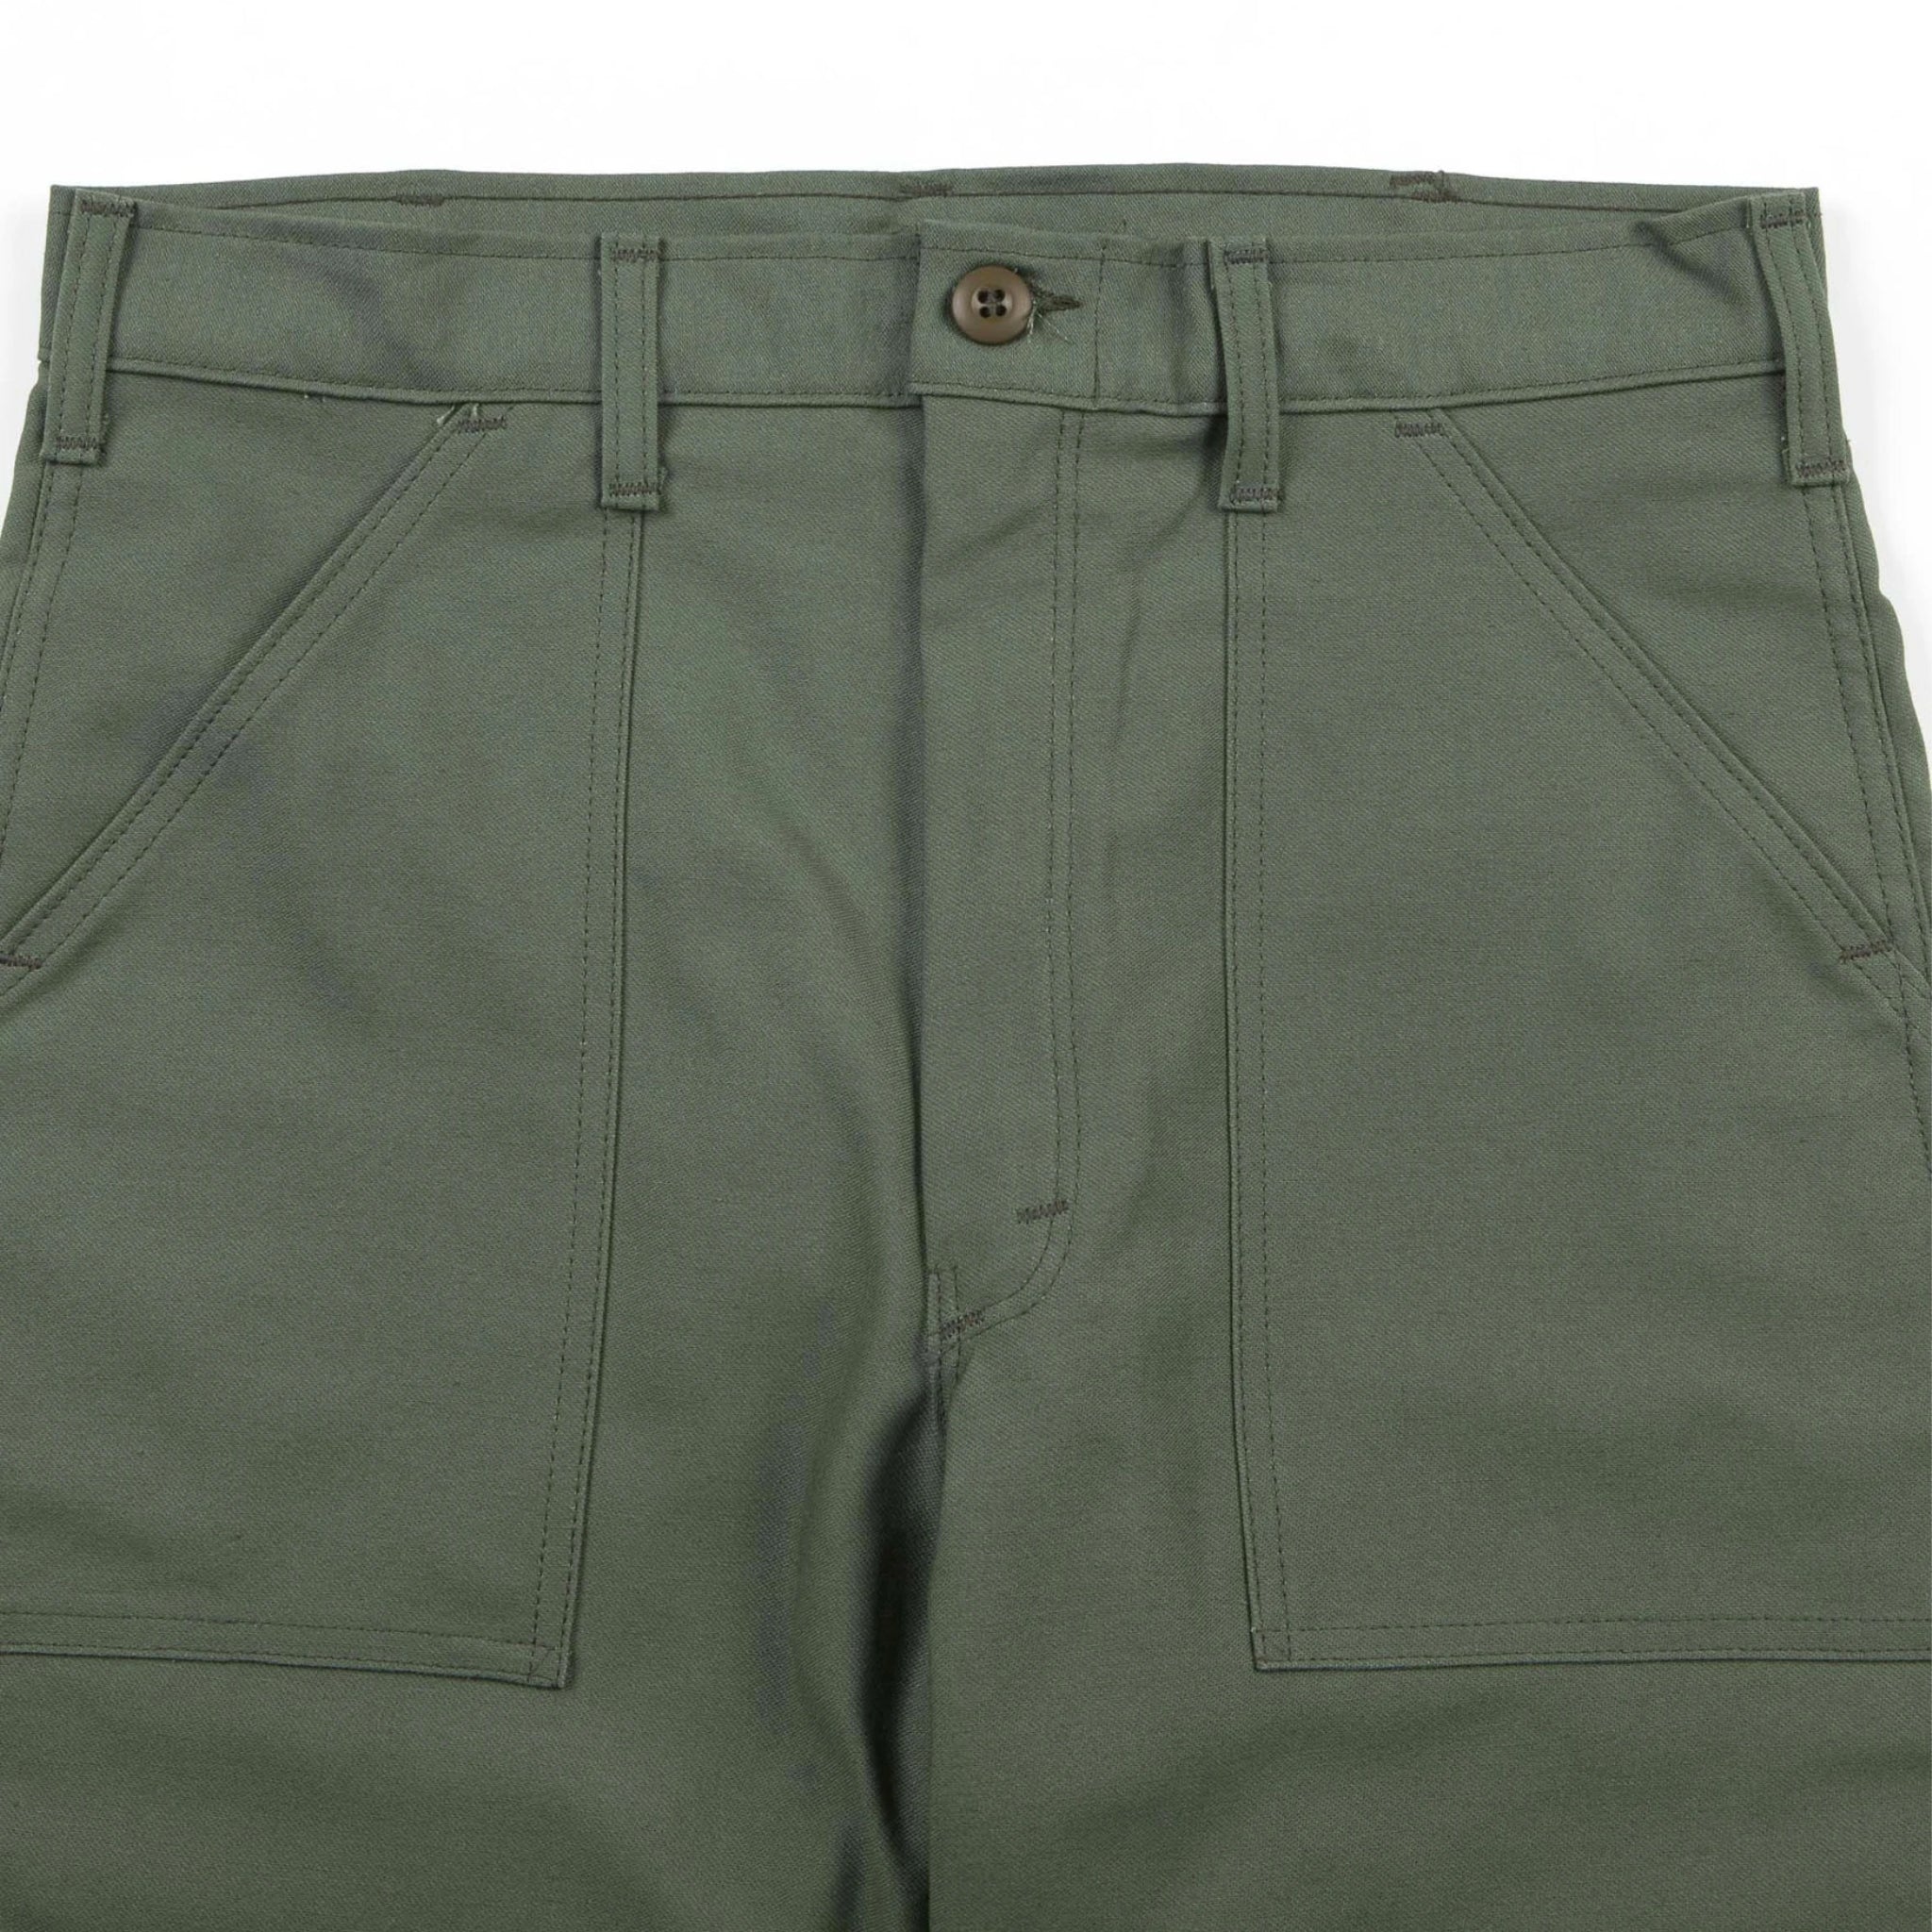 Stan Ray Original Fatigue Pant 1101 (Olive Sateen) - August Shop